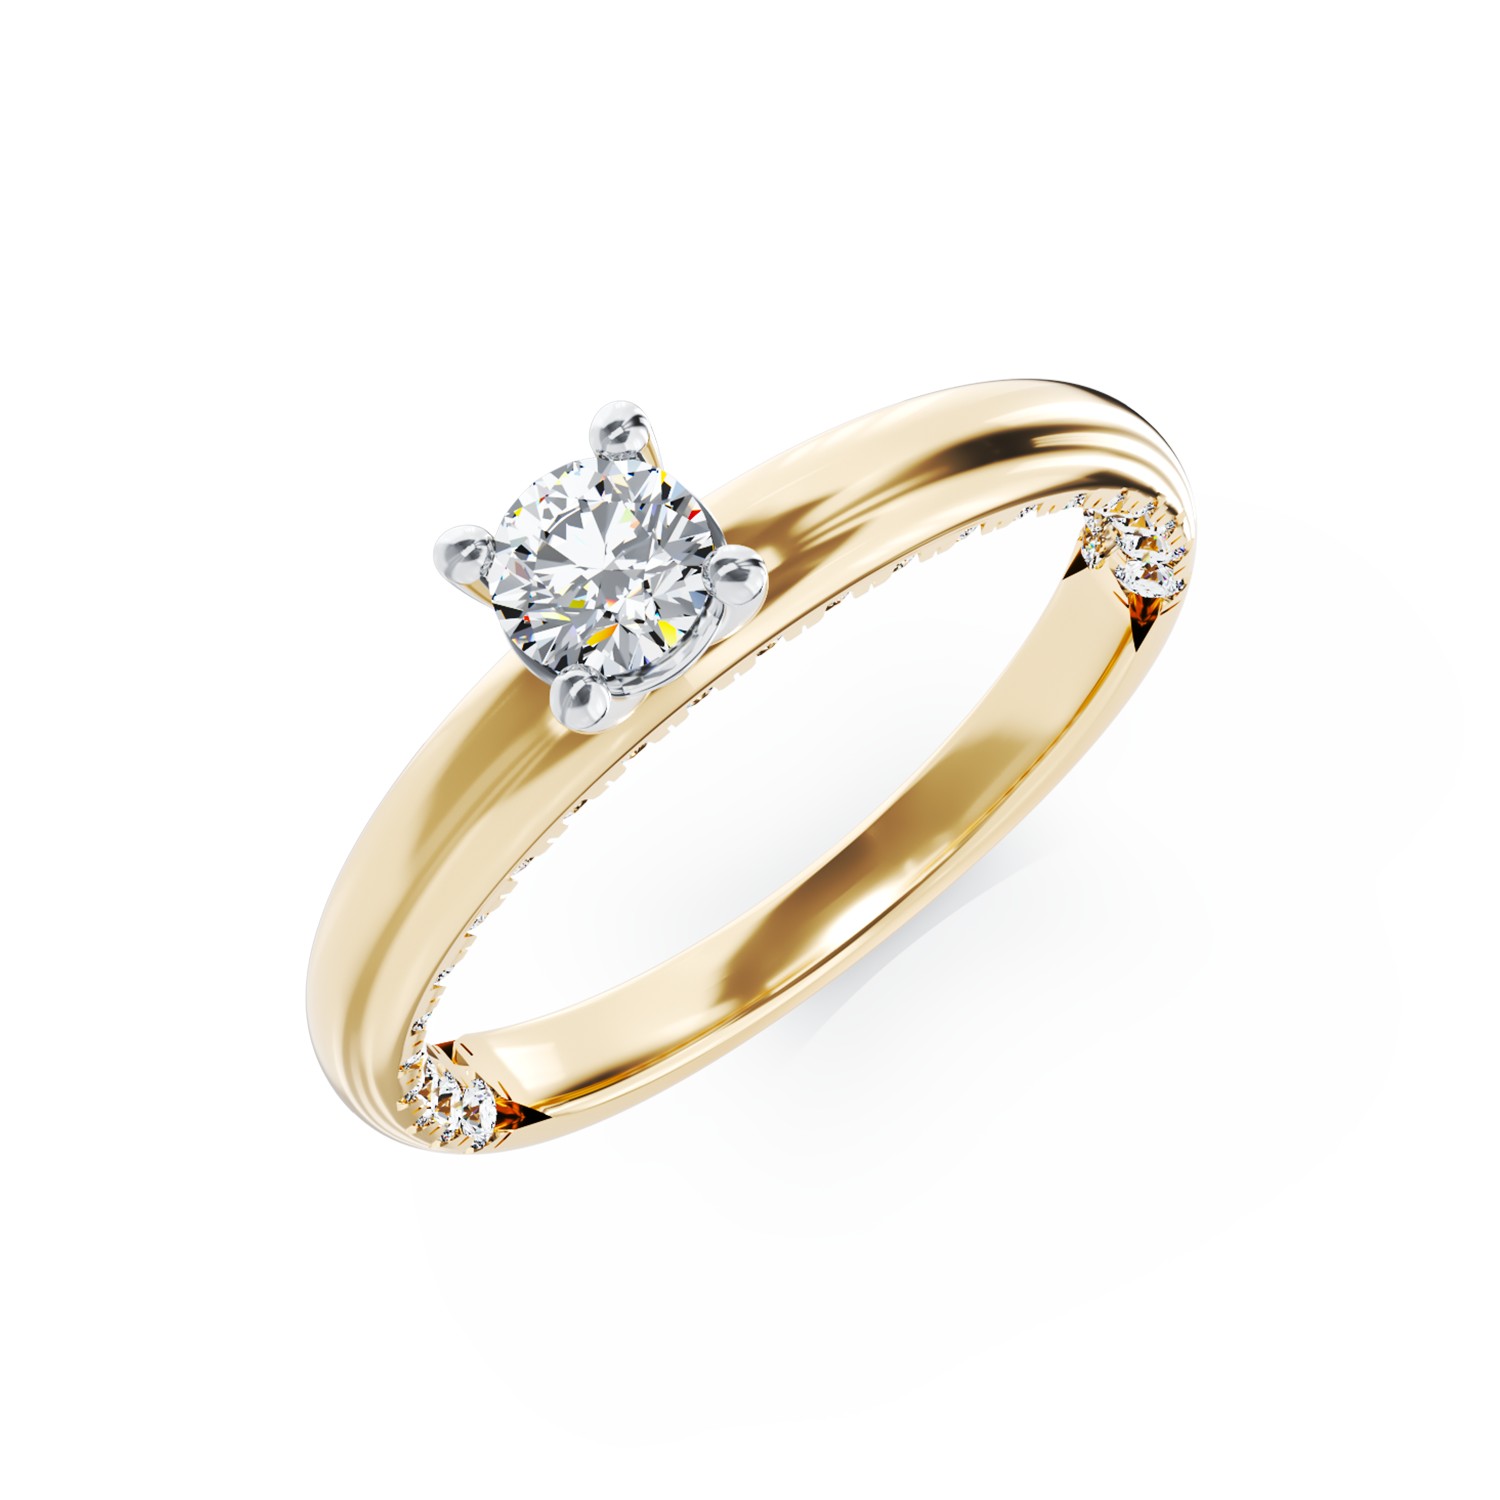 18K yellow gold engagement ring with 0.2ct diamond and 0.2ct diamonds